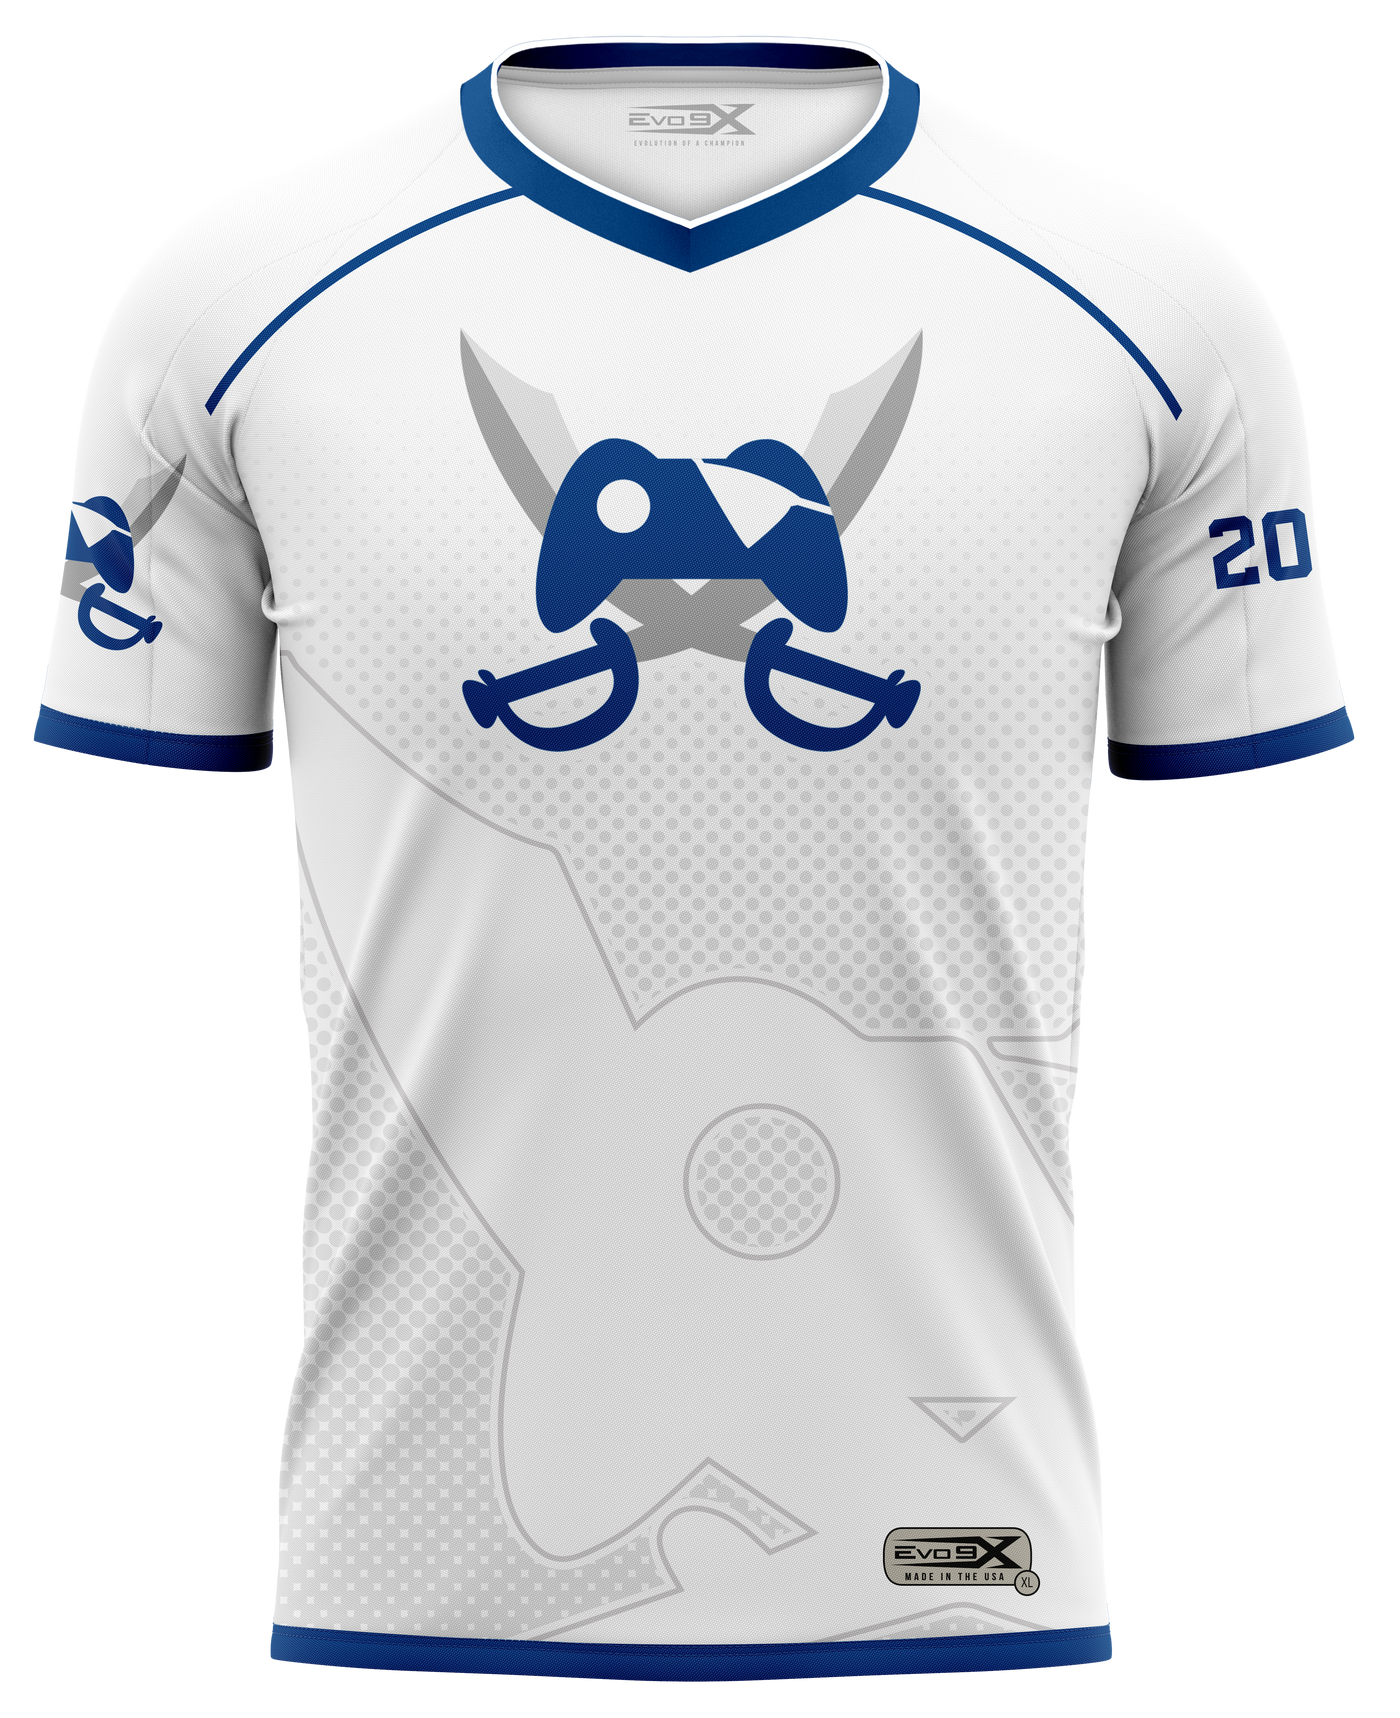 The Gaming Sector Pro Jersey